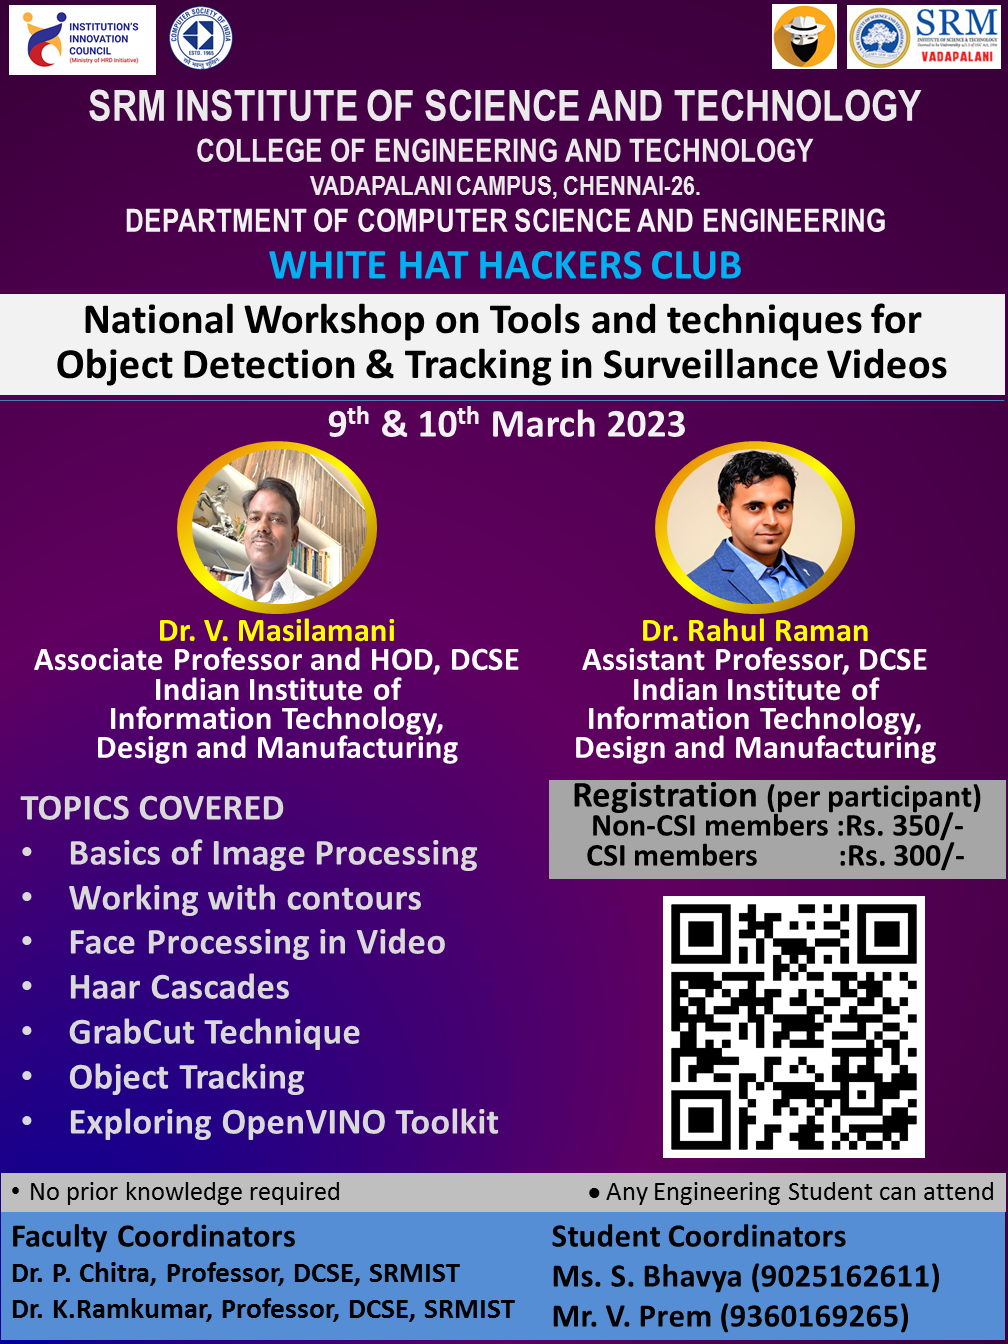 National Workshop on Image Detection and Tracking in Surveillance Videos 2023